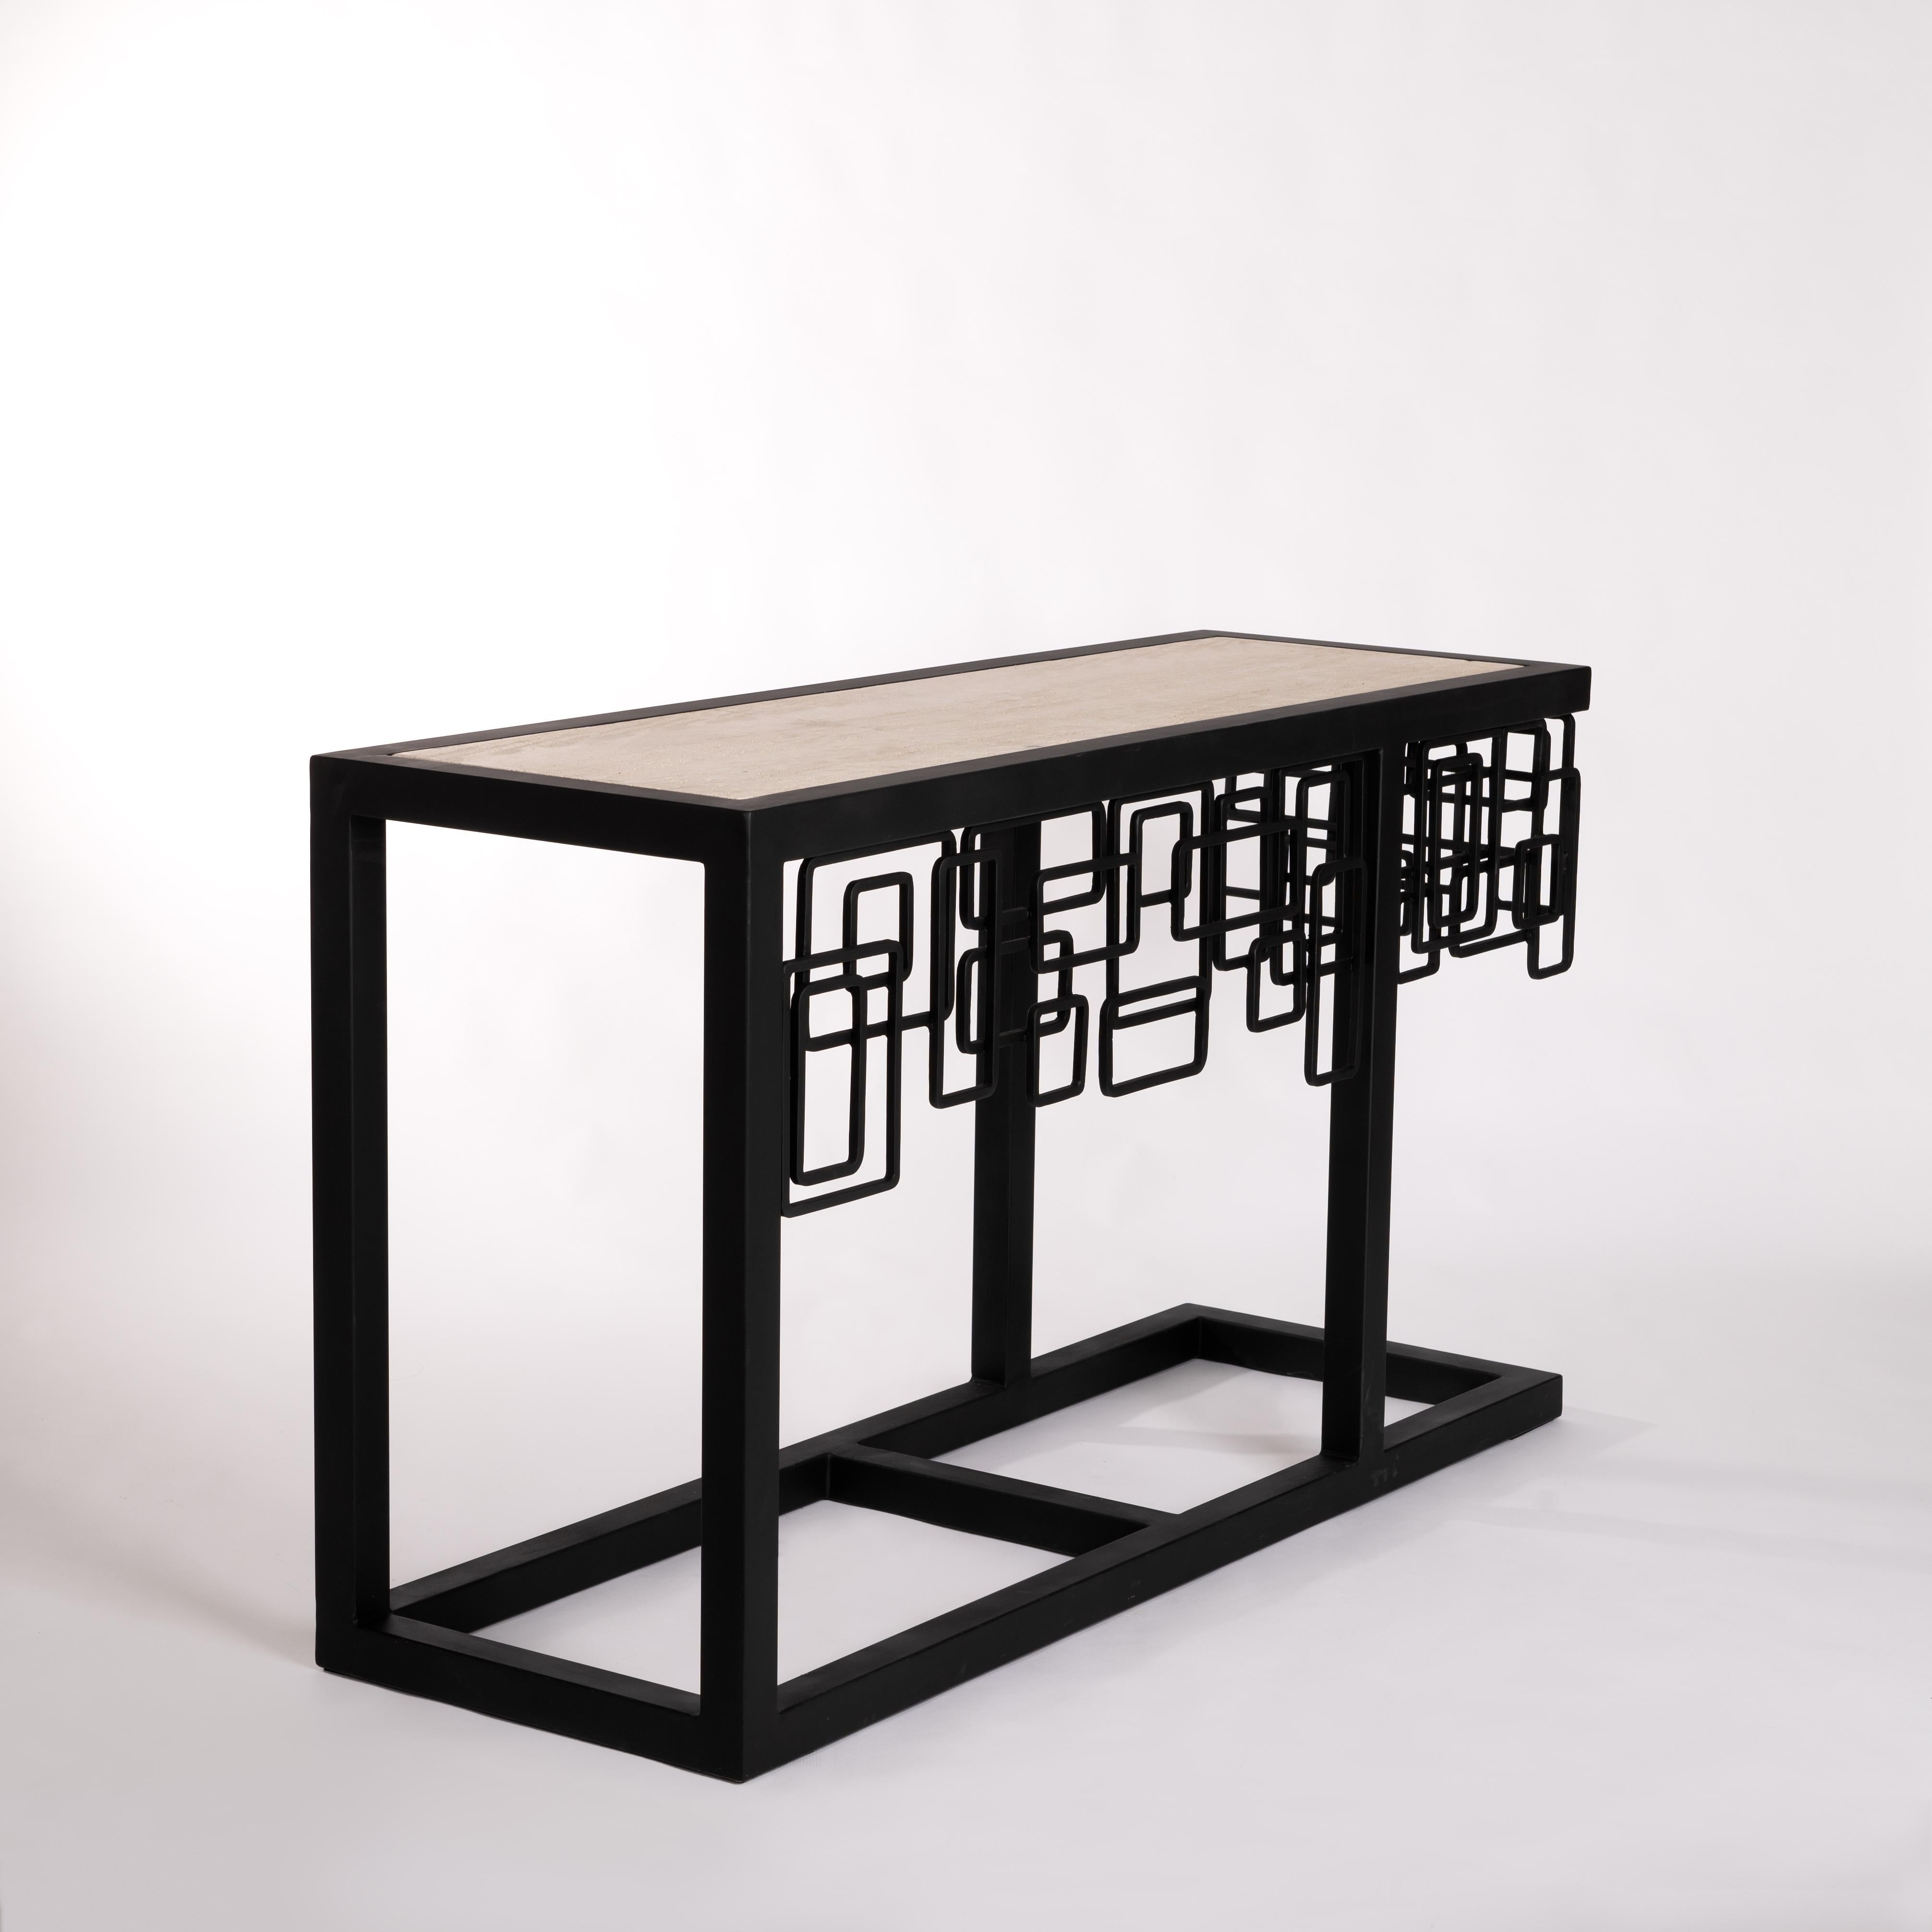 Late 20th Century Italian Mid-Century Iron/Travertine Console Table Abstract-Geometric Design 70s For Sale